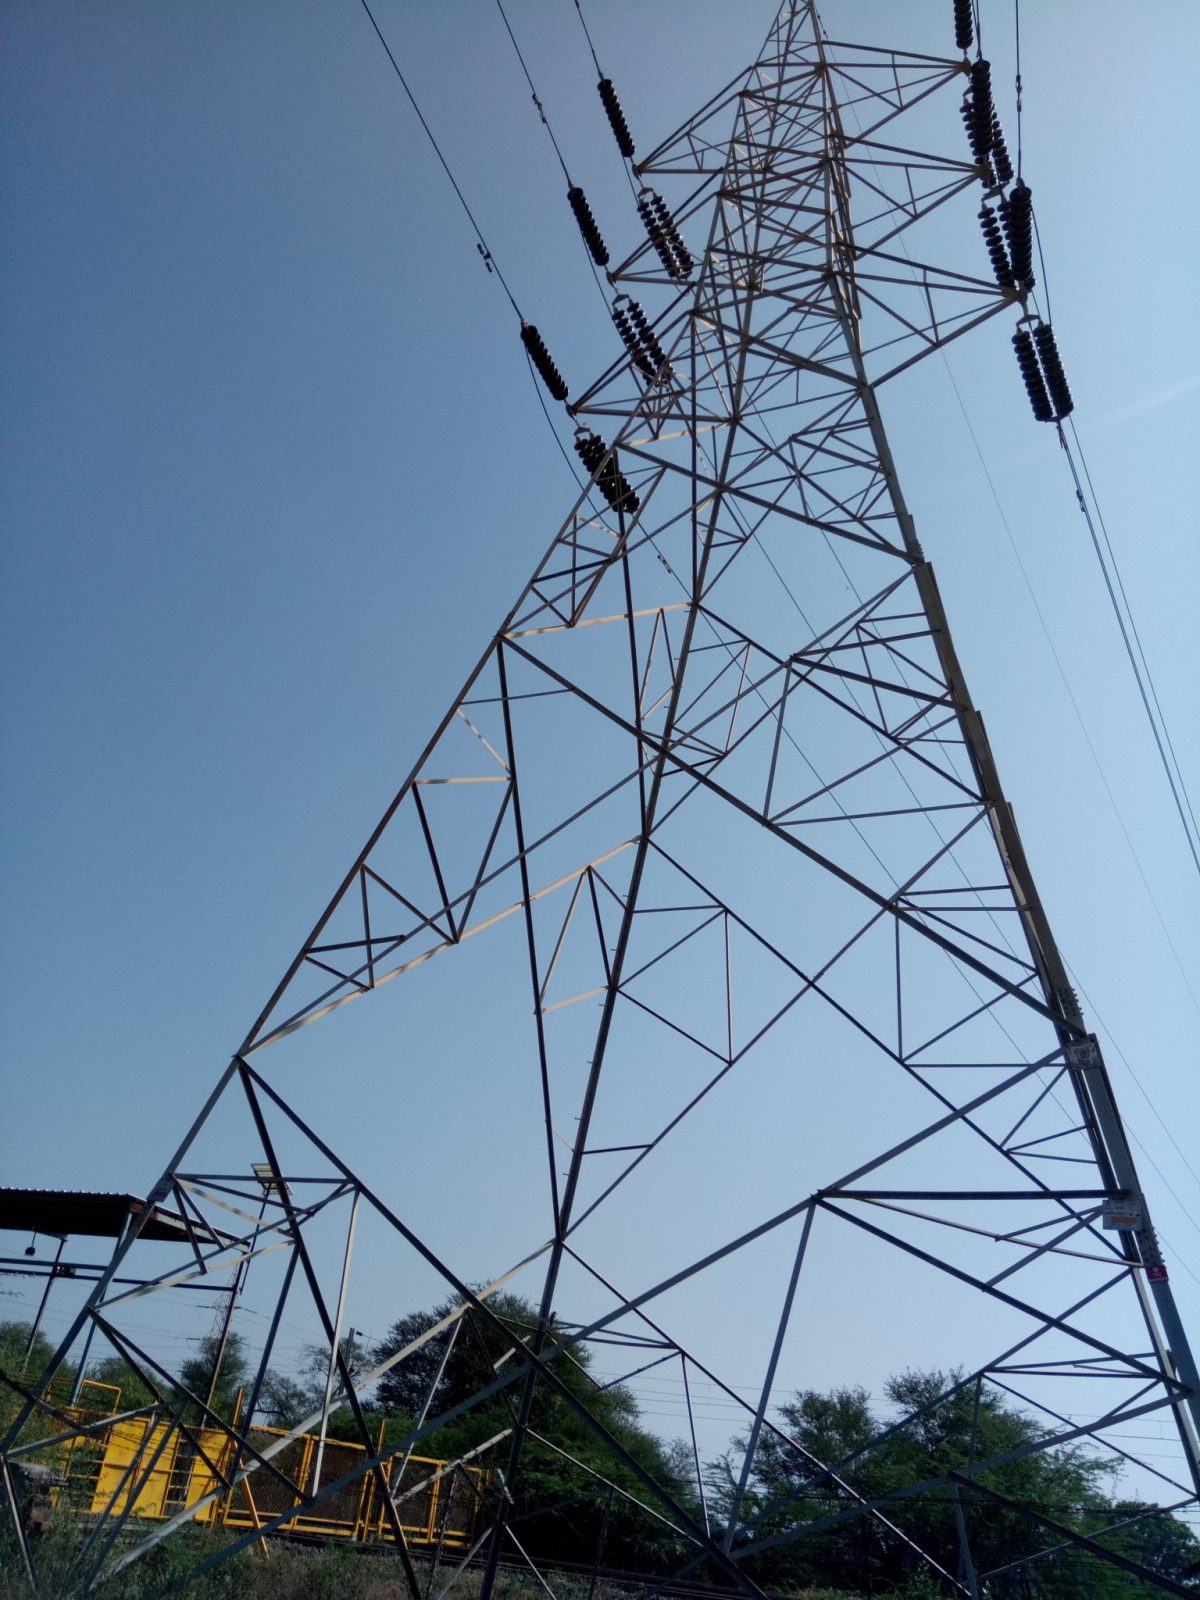 Living near high voltage power lines. What is the risk?